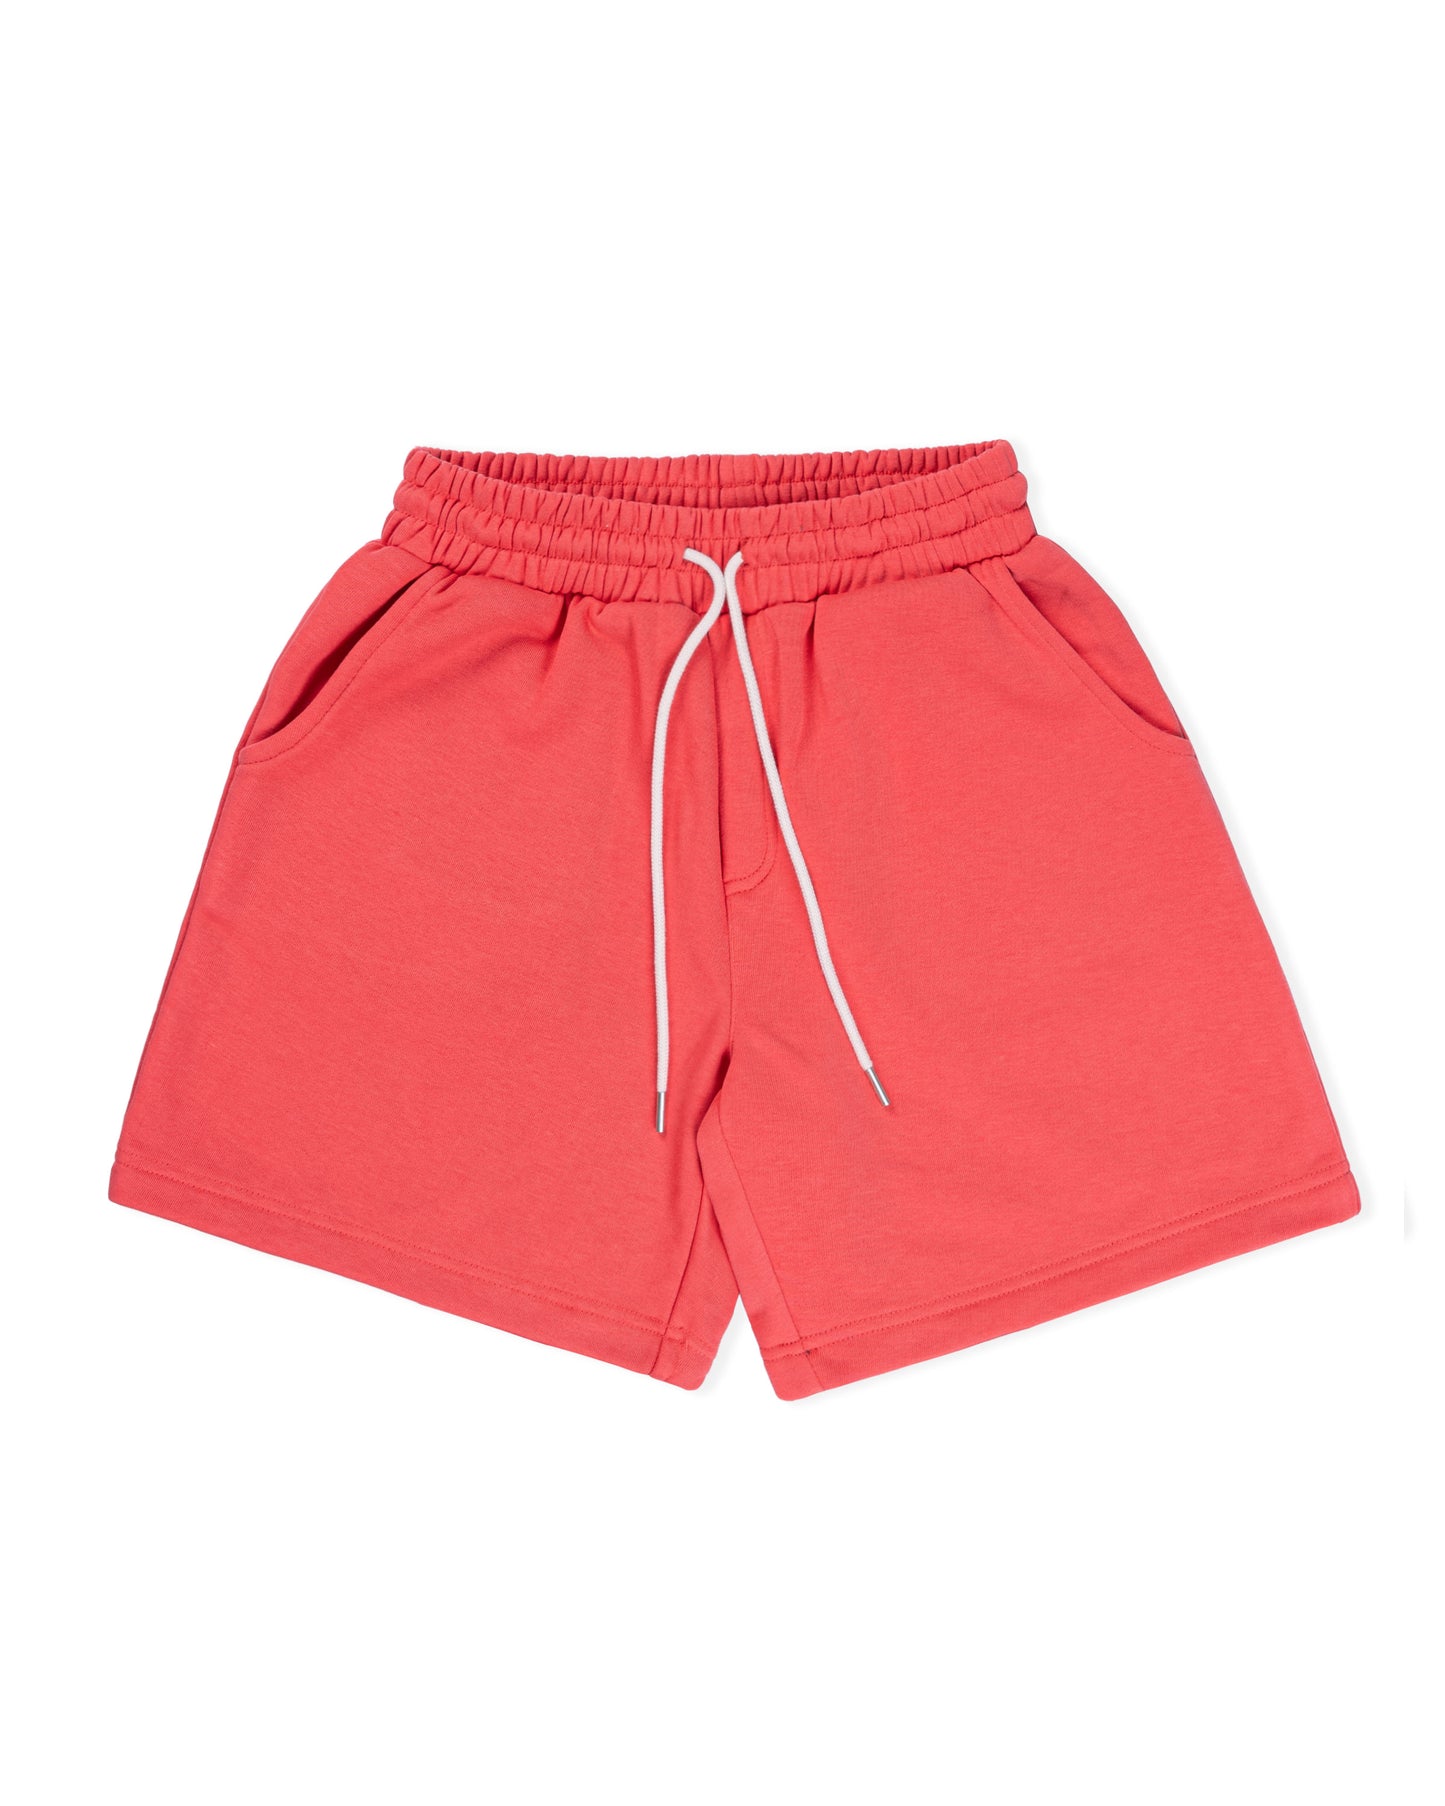 Levents® Classic ShortPants/ Red Coral